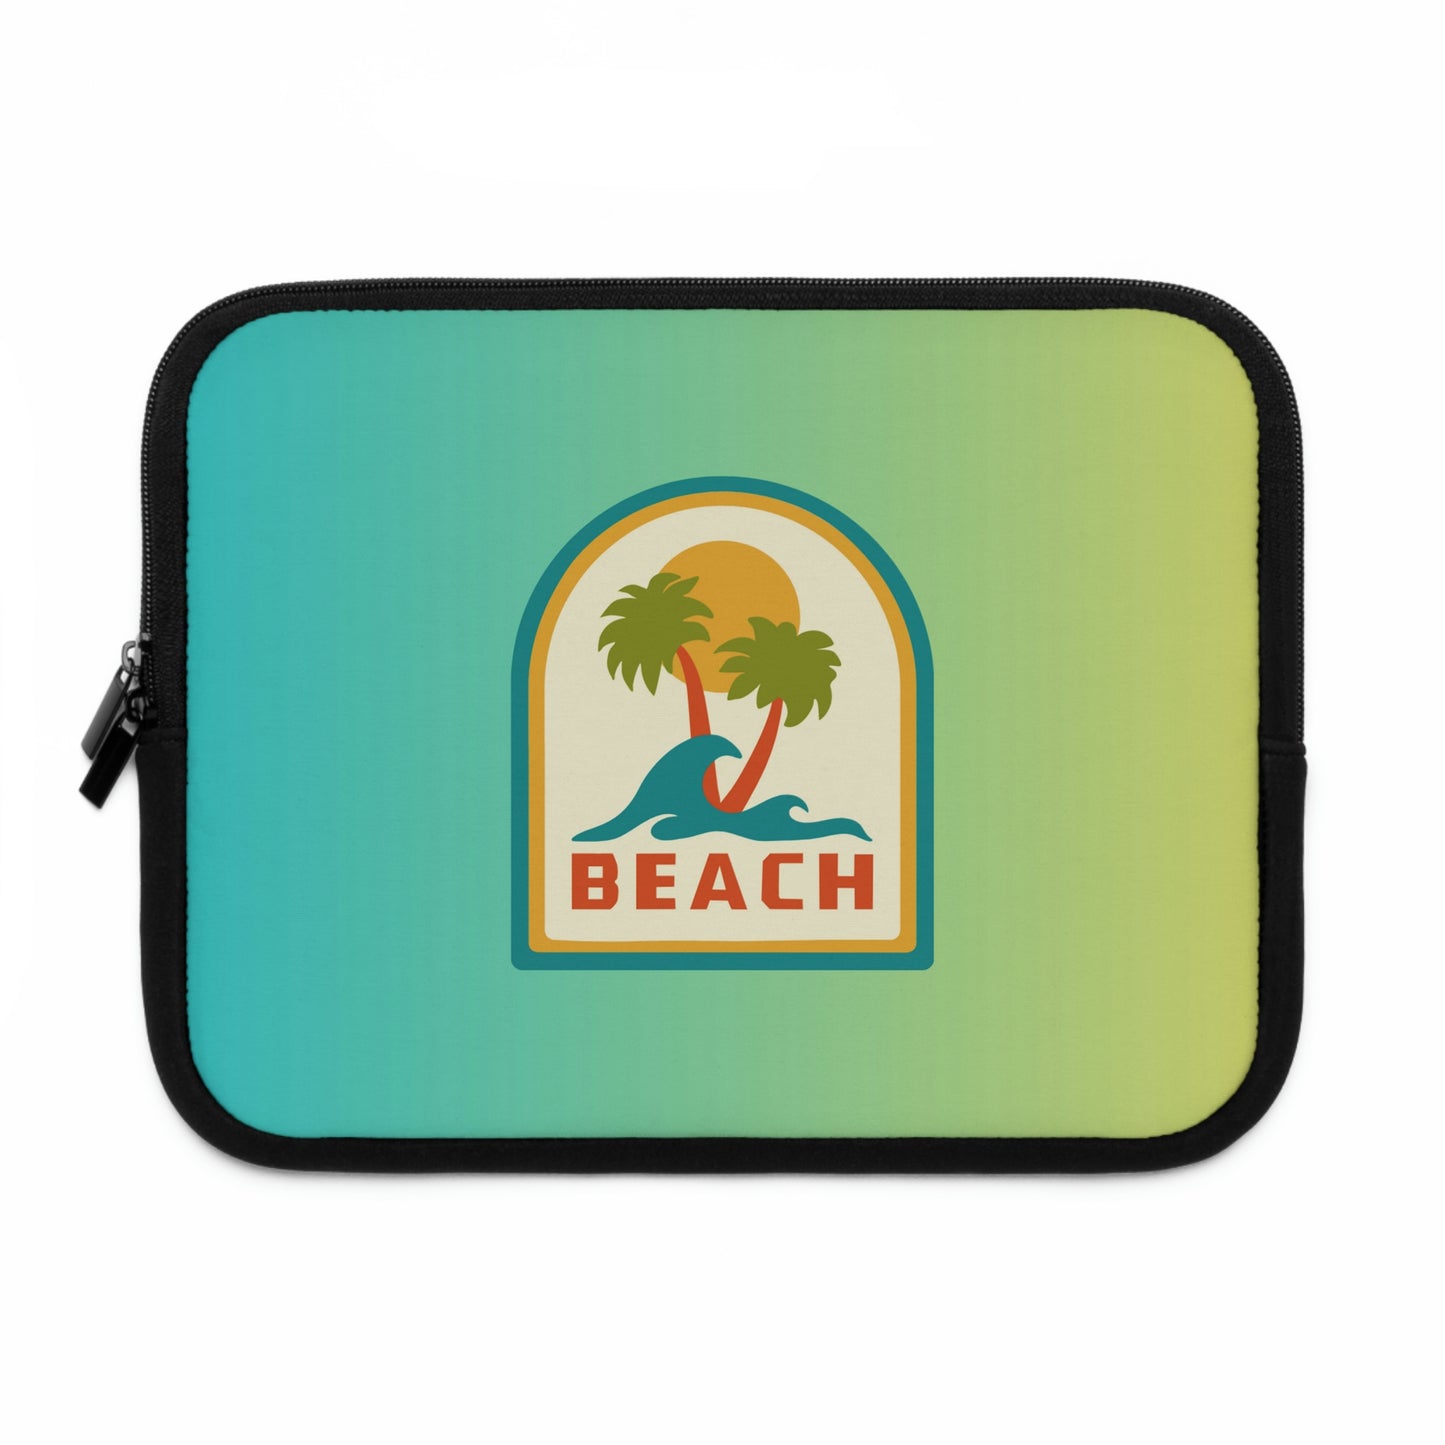 Beach Stamp Compact Tote Bag